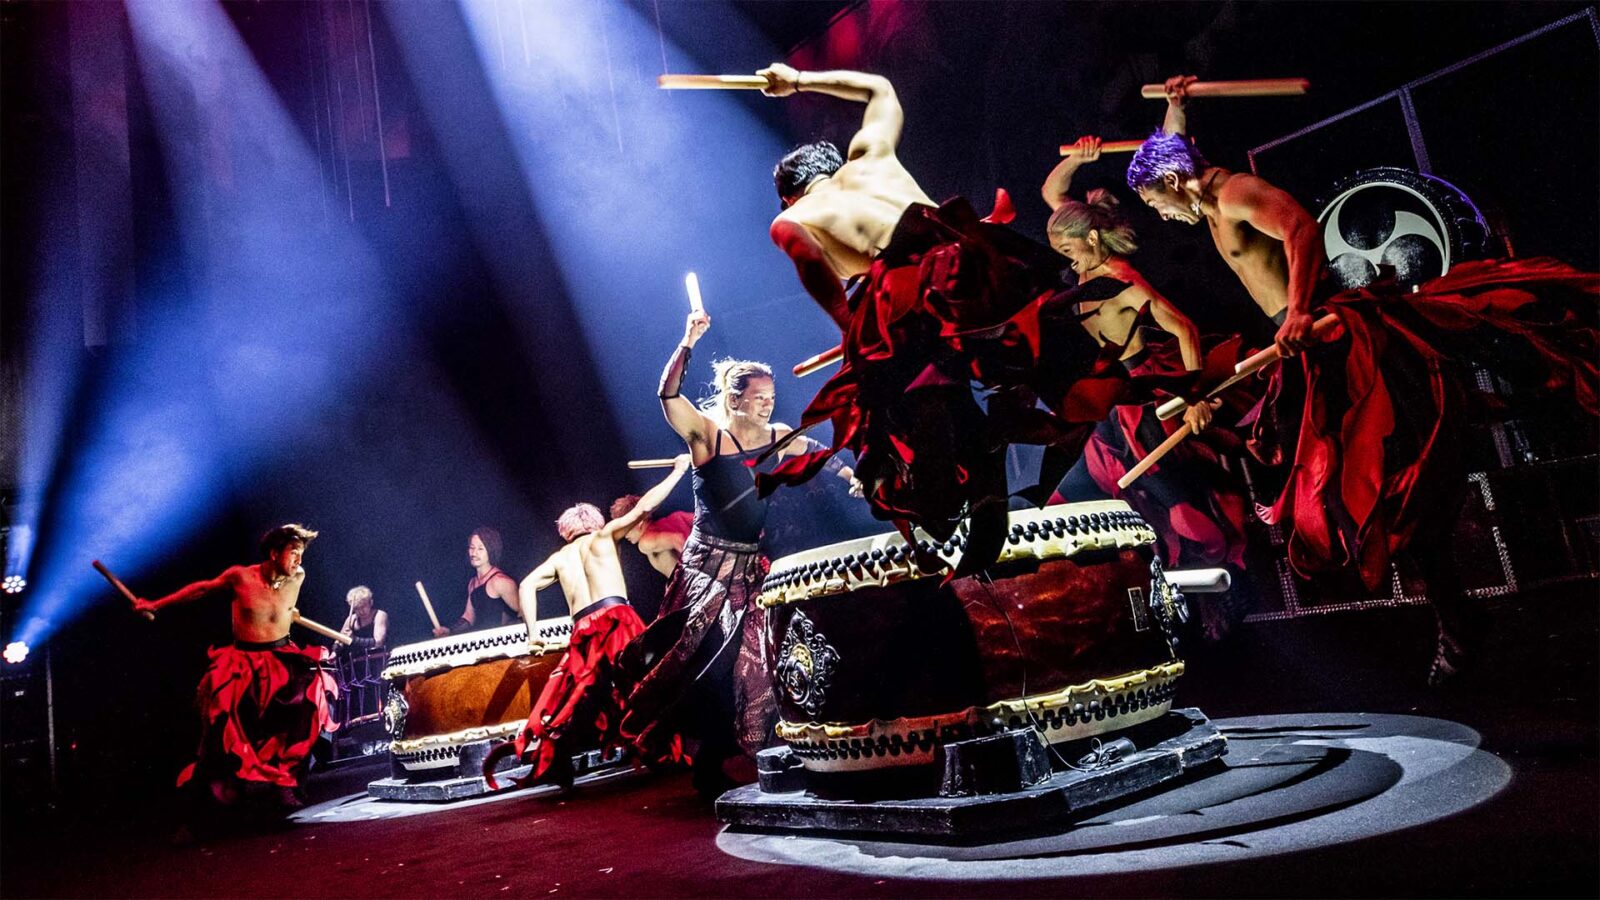 drums on stage and a group of Japanese players, drumming while jumping